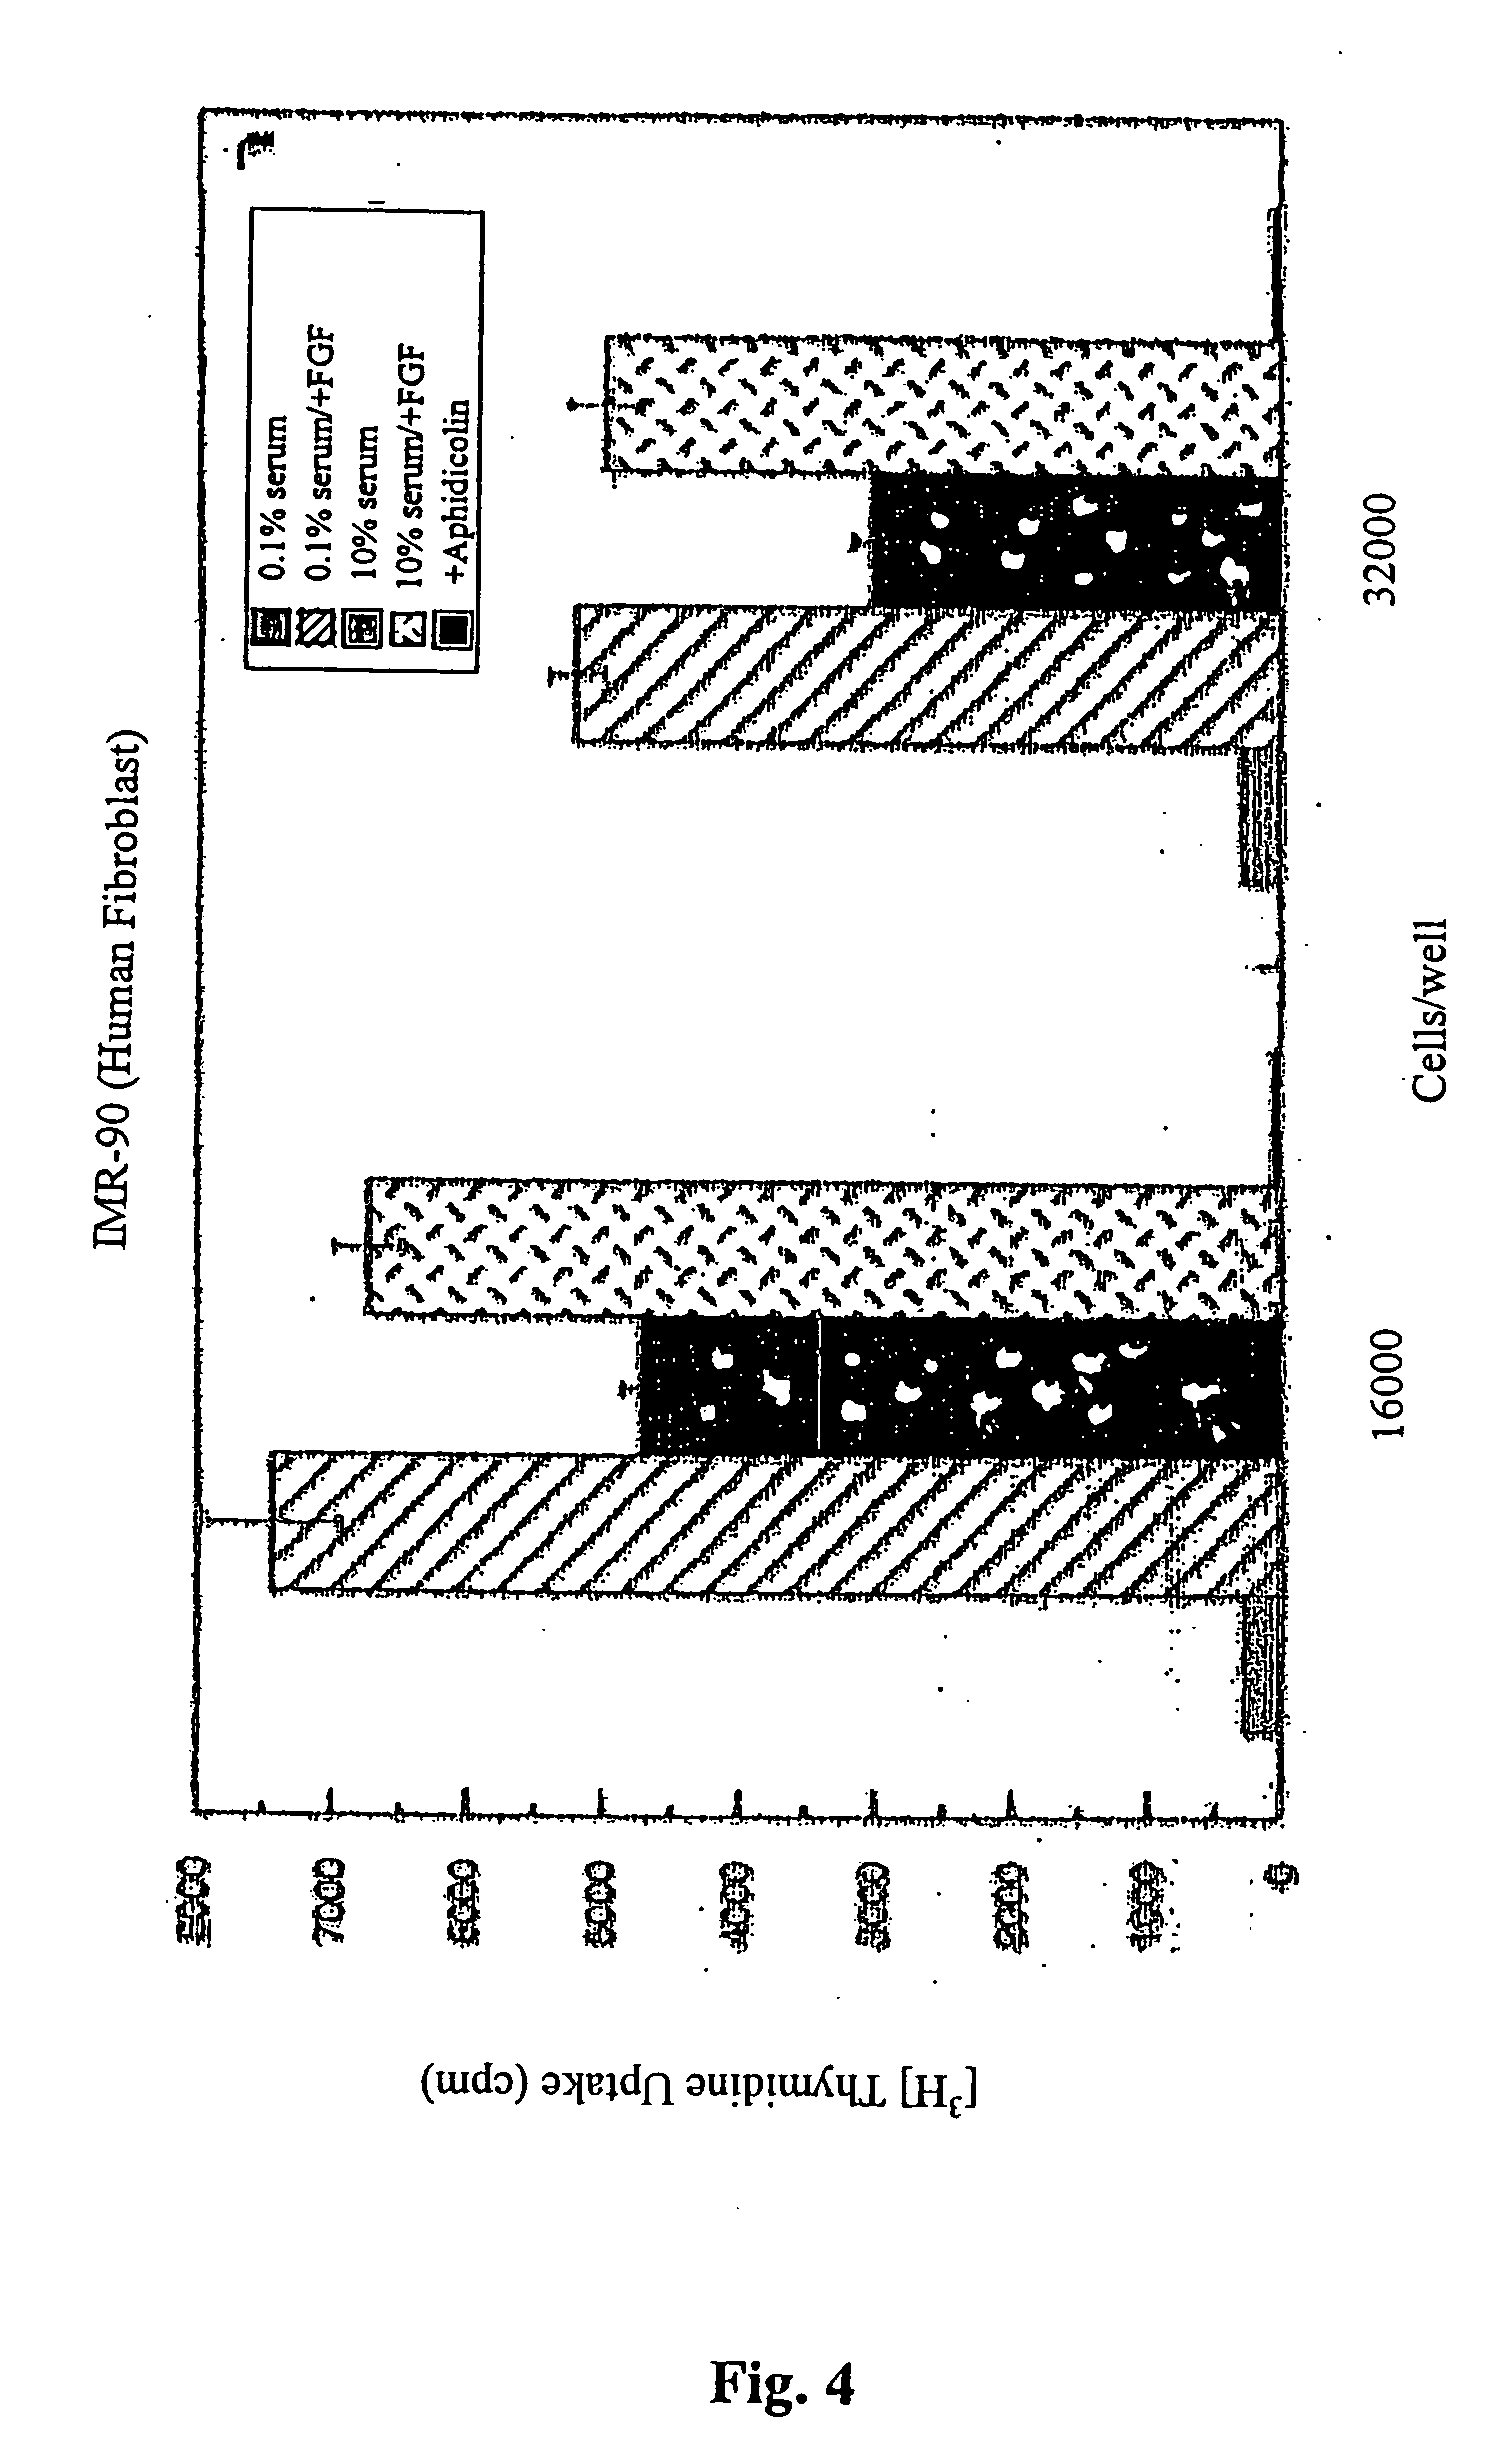 Methods of identifying cytotoxic effects in quiescent cells